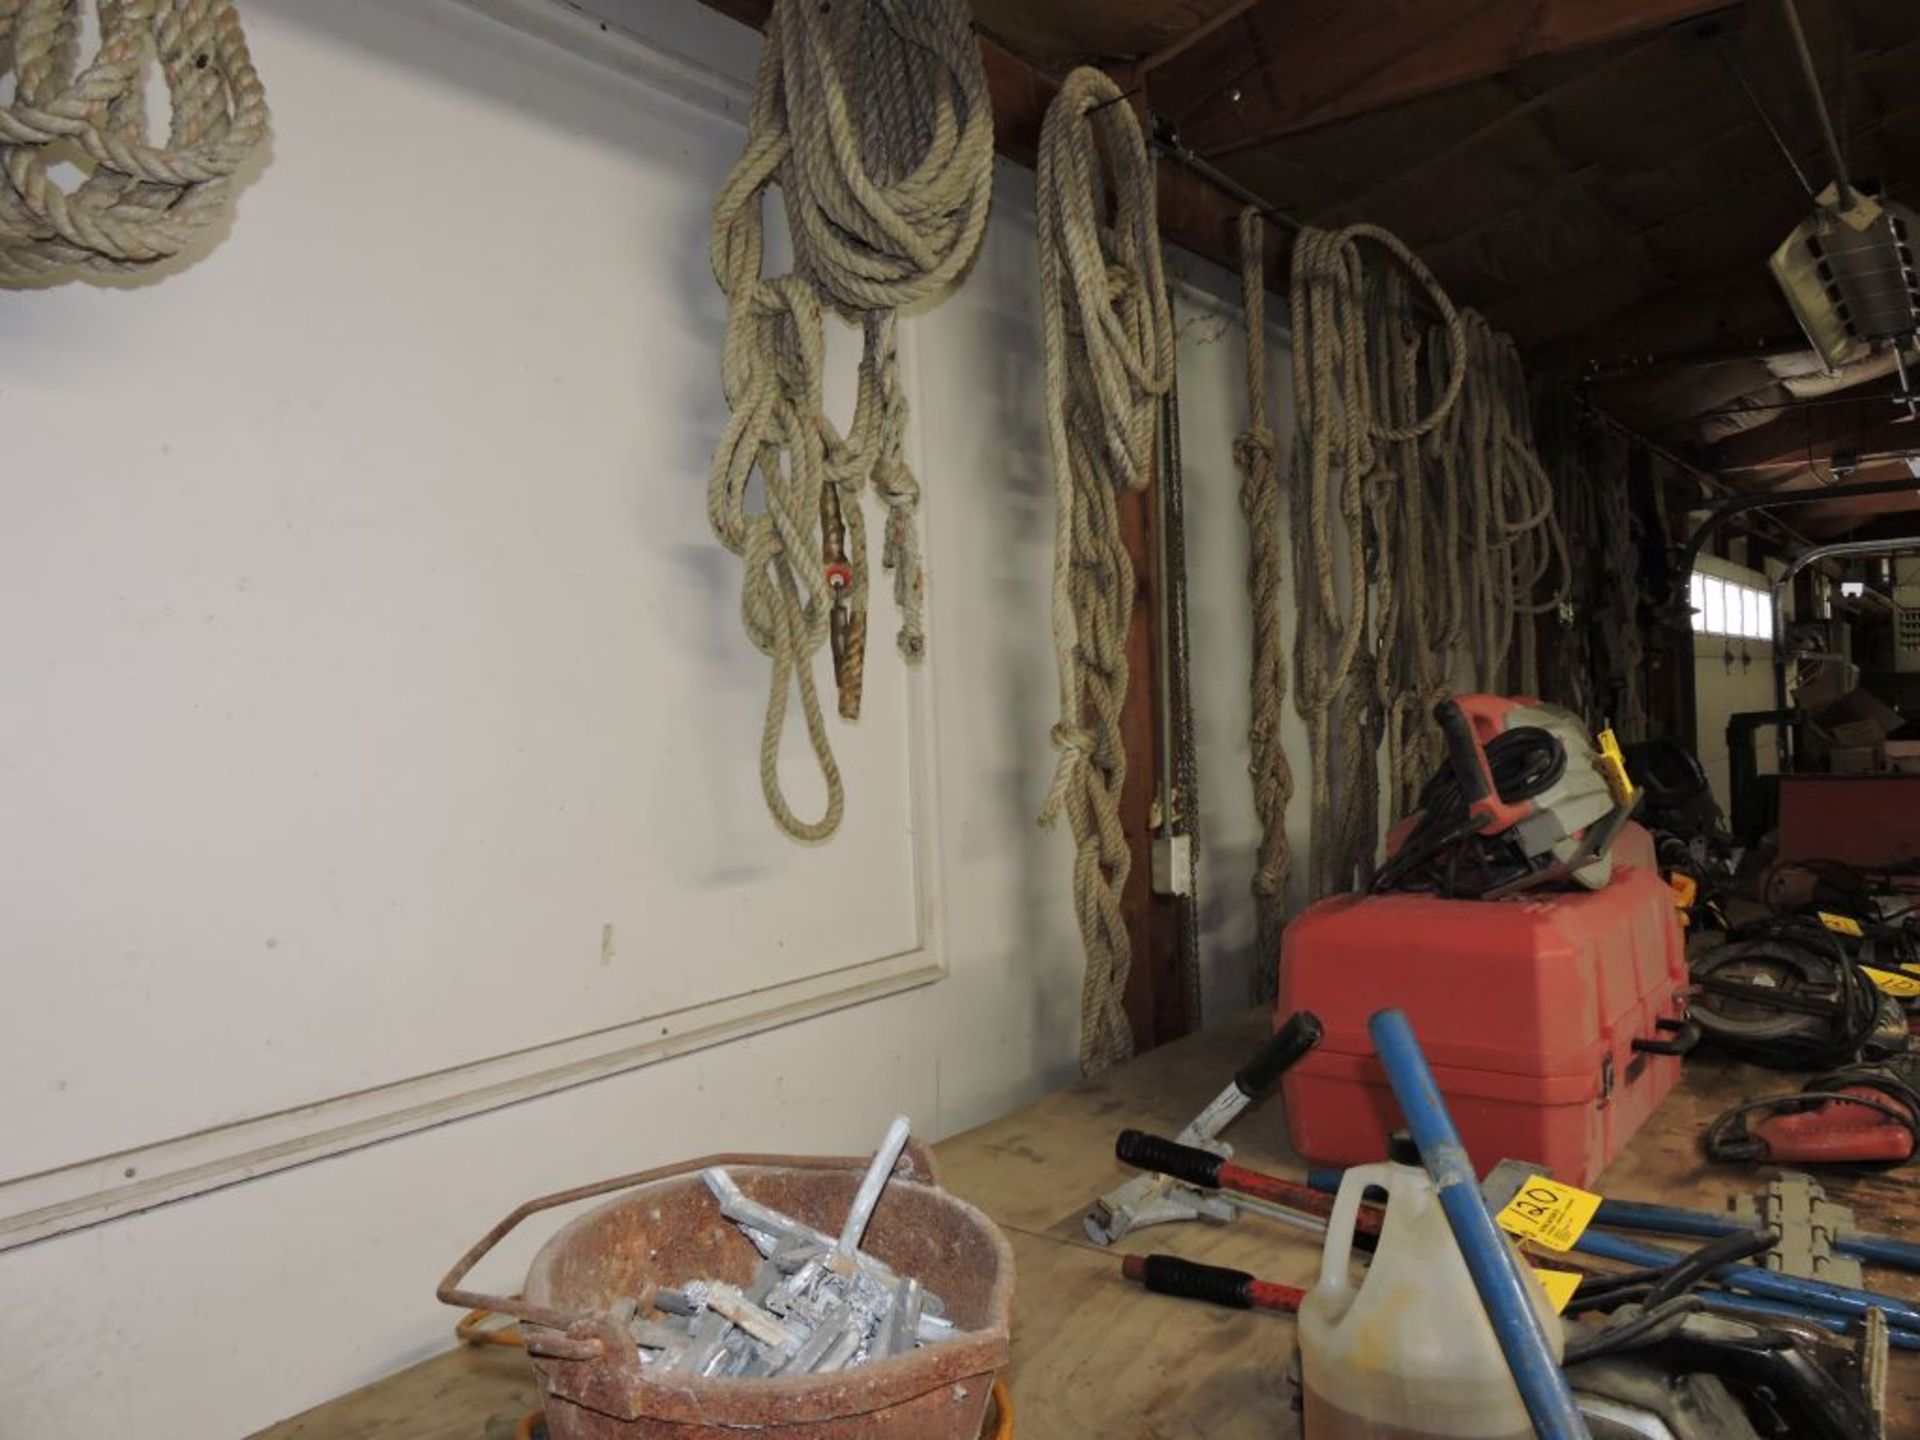 All rope on table. - Image 2 of 3